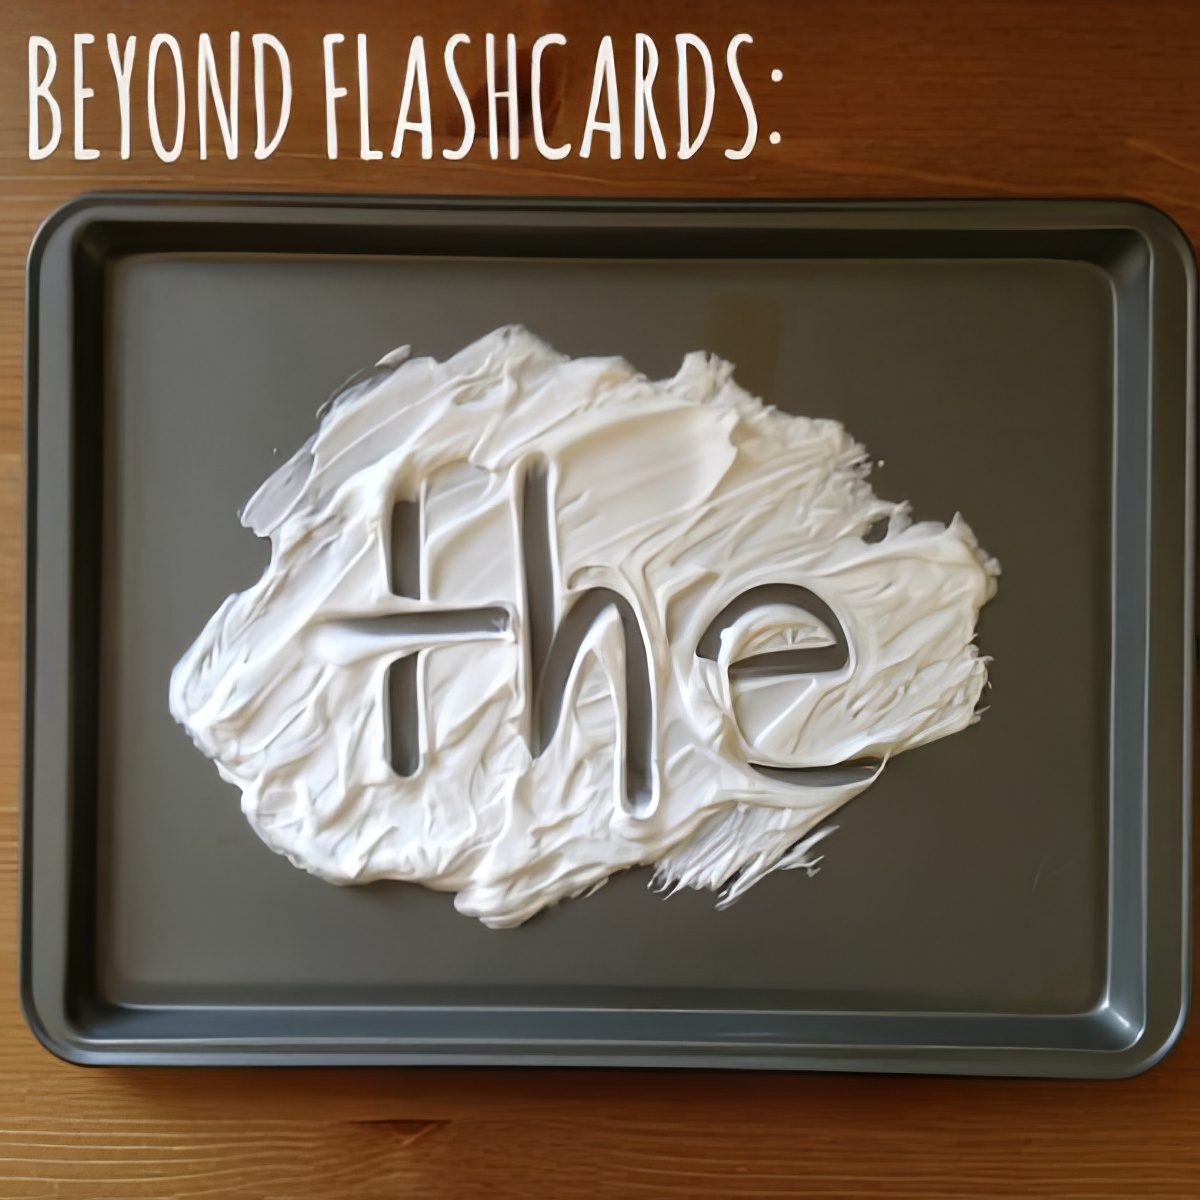 Be creative on making flashcards to make learning sight words fun and awesome!